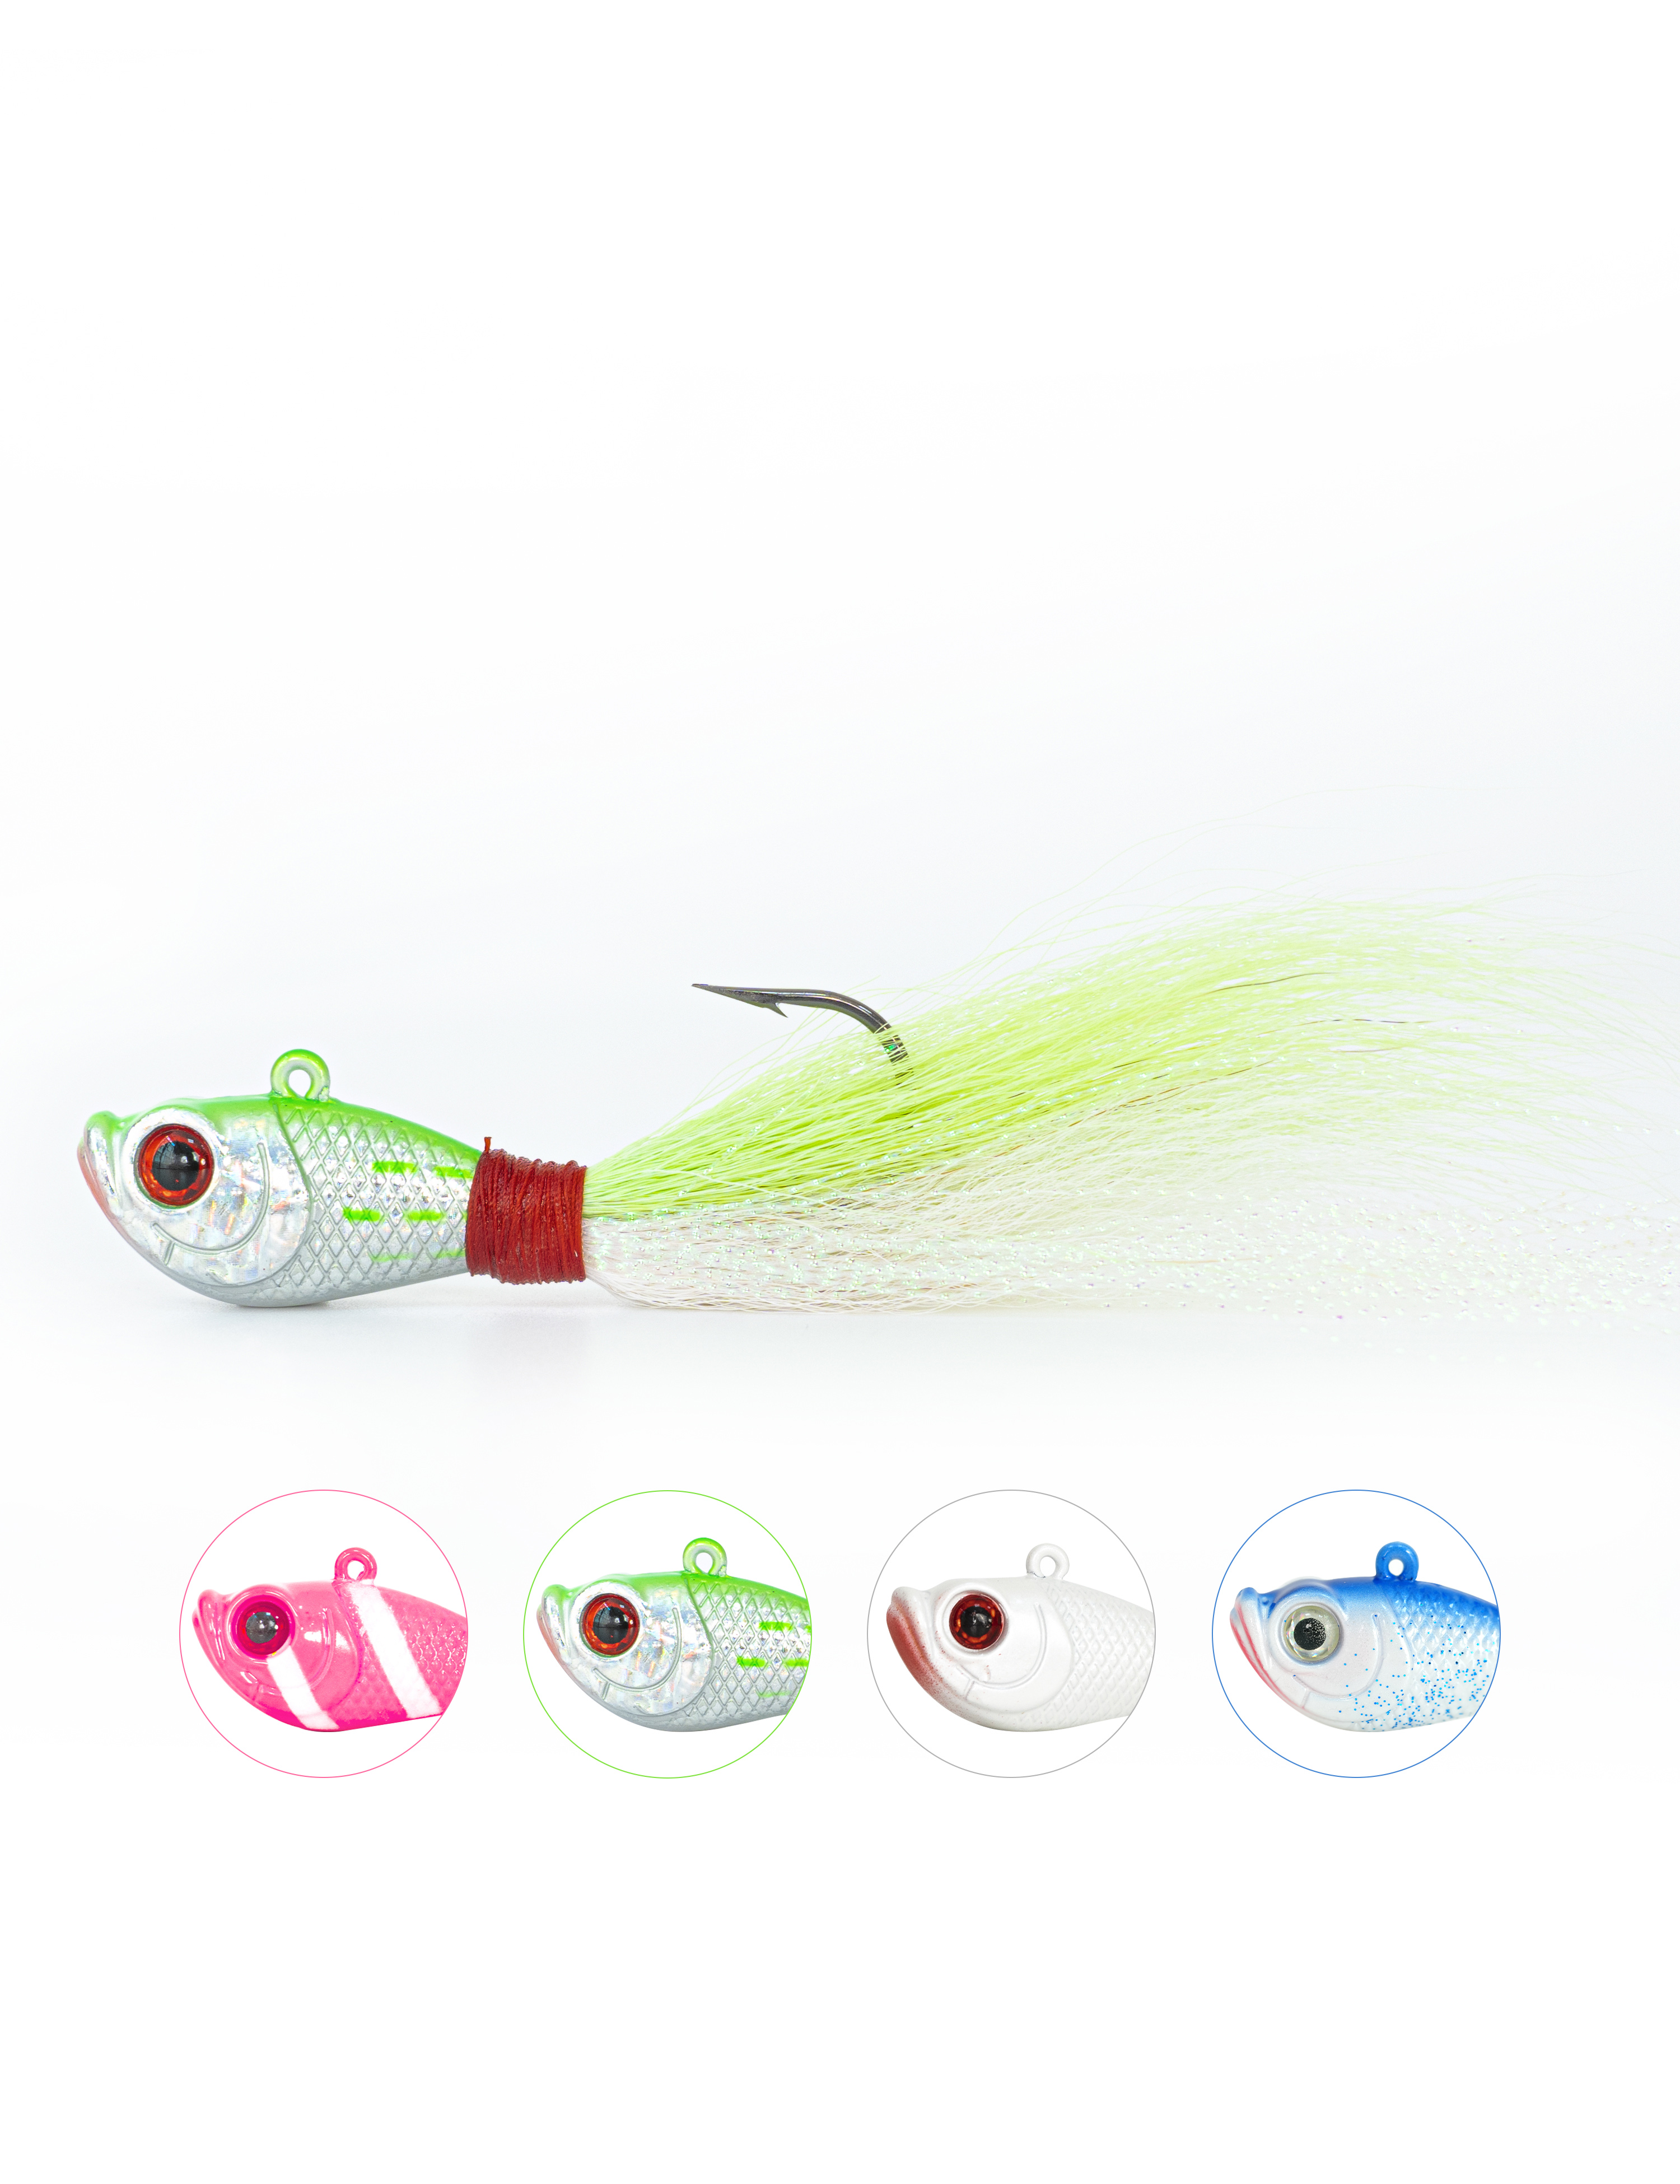 Sea Witch Trolling Lures for Big Game Fishing Multi Color 1 ounce Lure Head